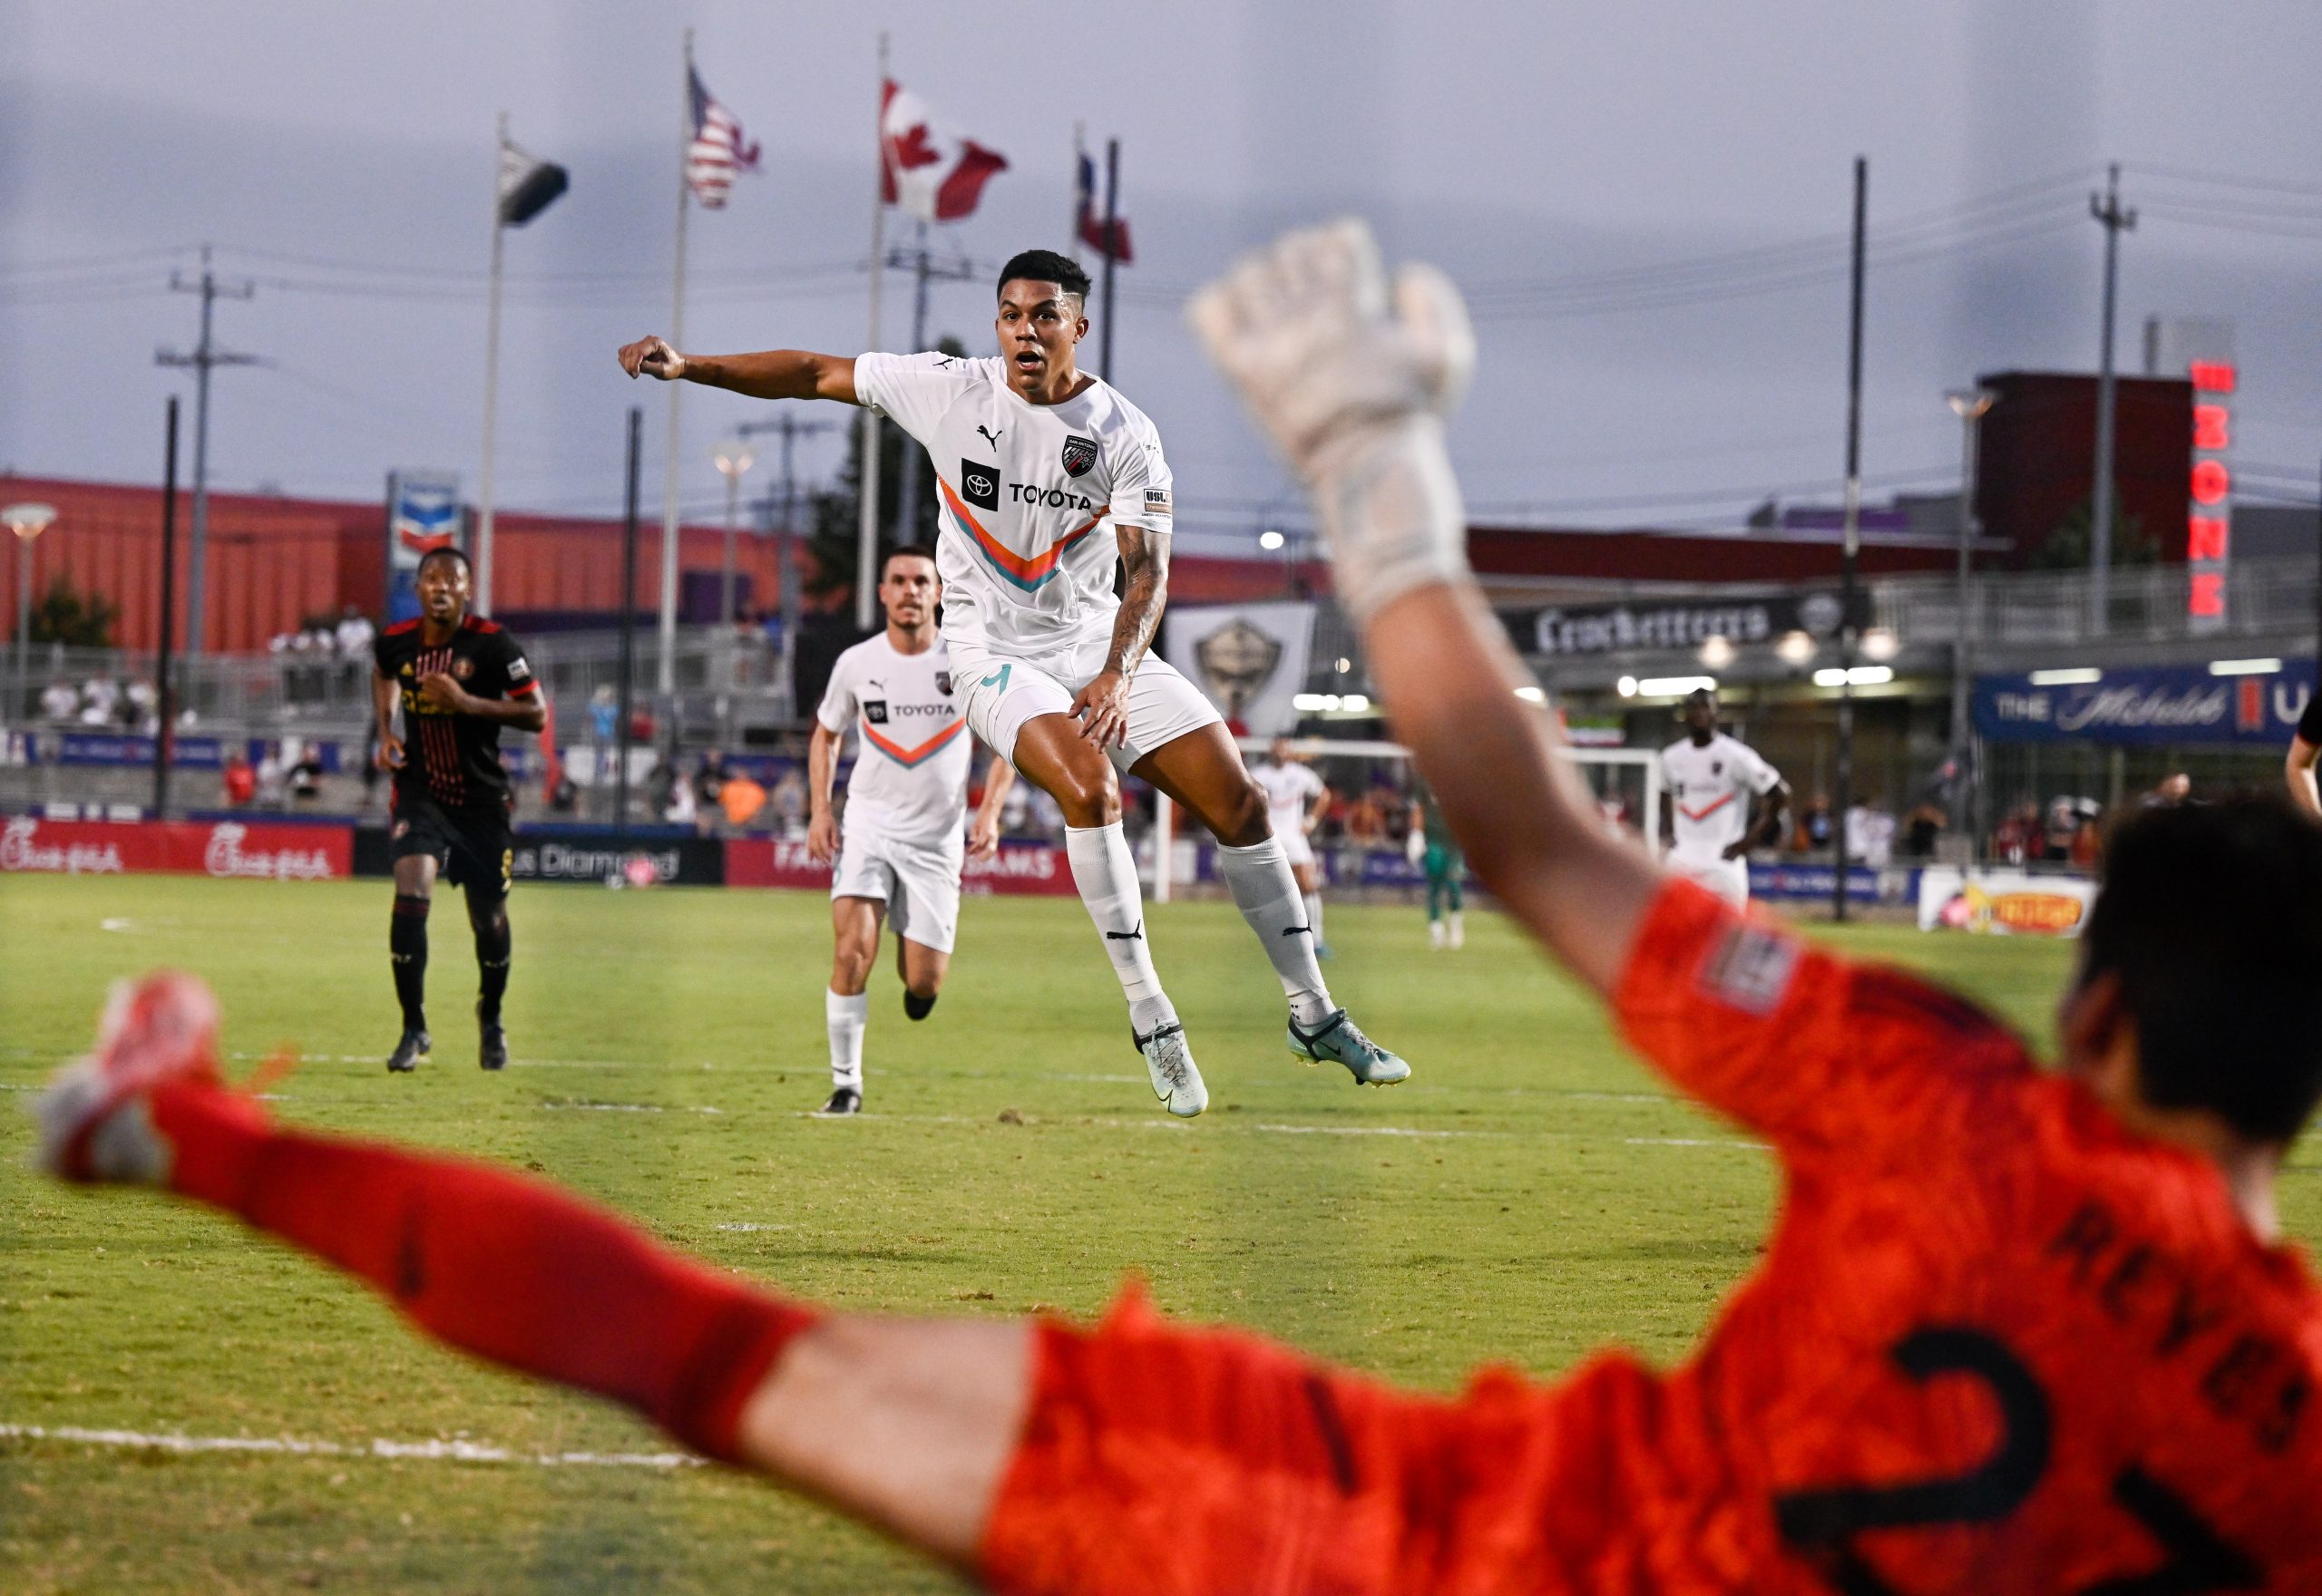 Why San Antonio FC is playing the best football in town